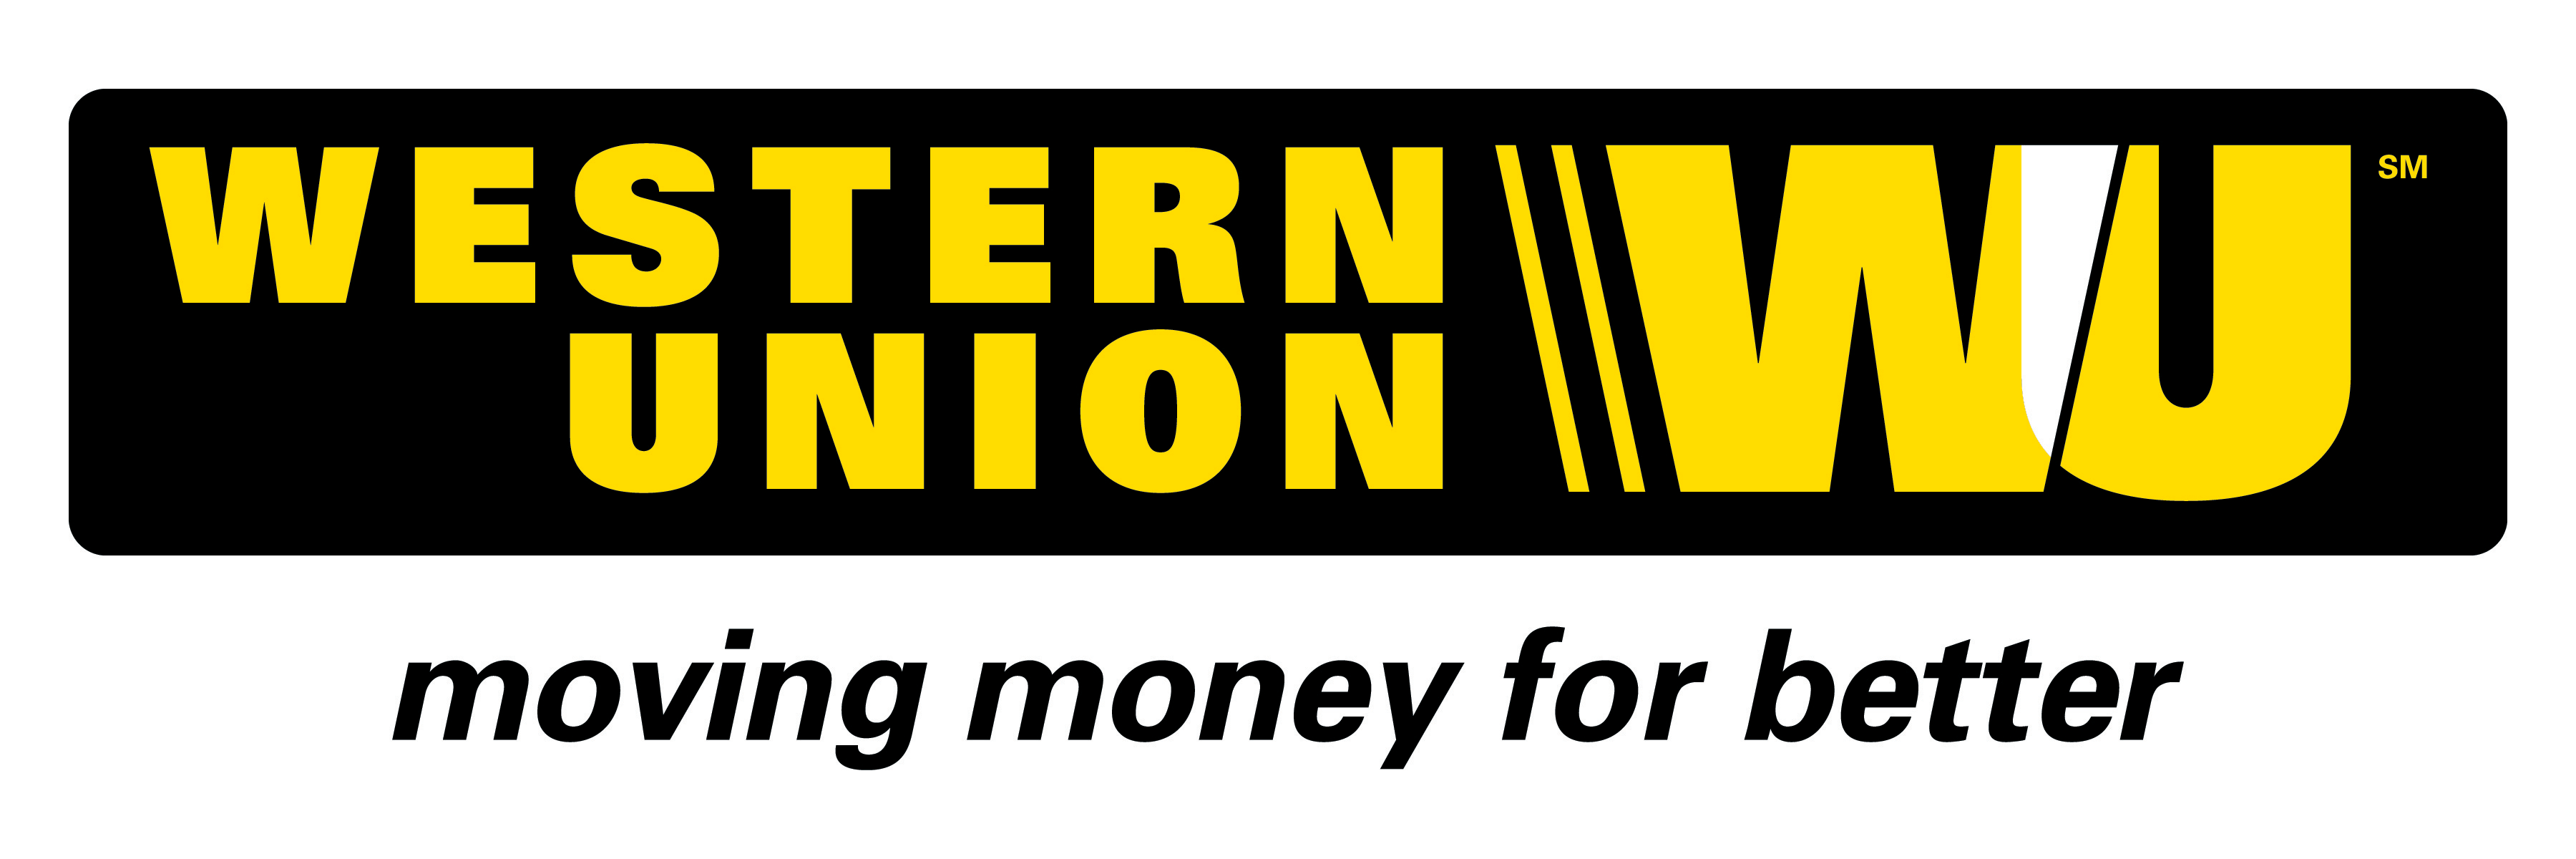 Contact Person For Any Western Union Reliable Quires. Name: Ahmad Samim Meherzad Mobile: 93 (0) 792990061. Email: Wu@bakhtarbank.af - Western Union, Transparent background PNG HD thumbnail